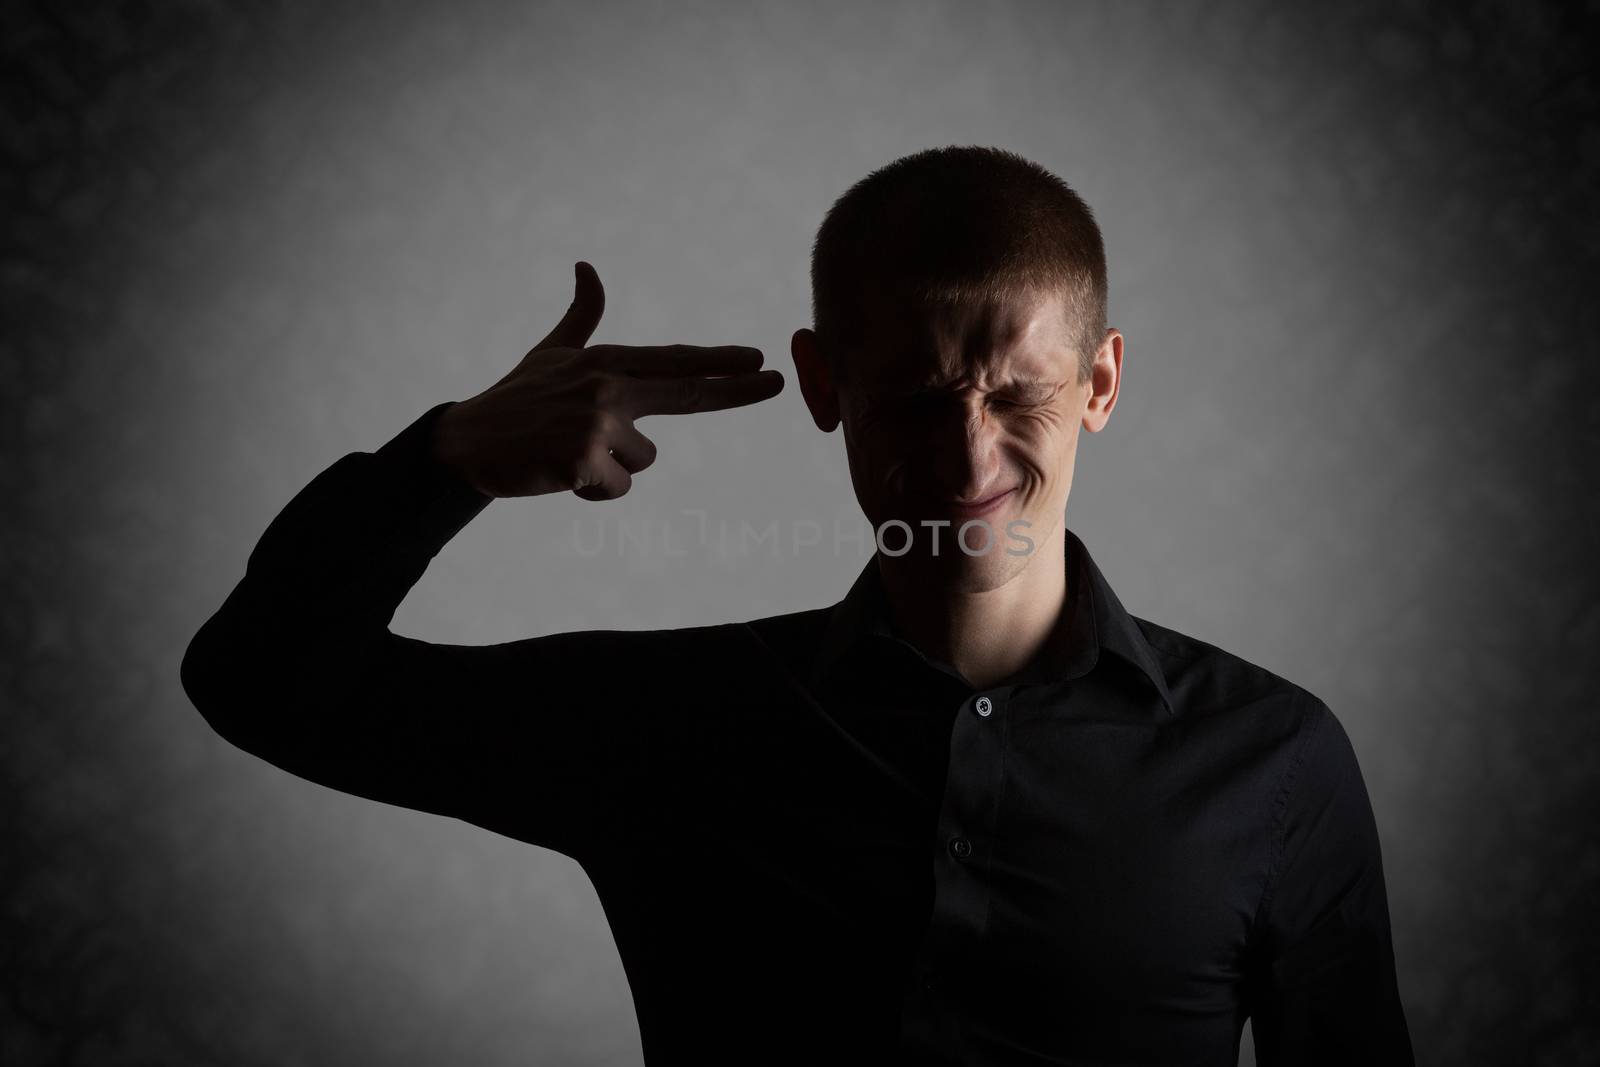 Frustrated young man put an imaginary gun to his head